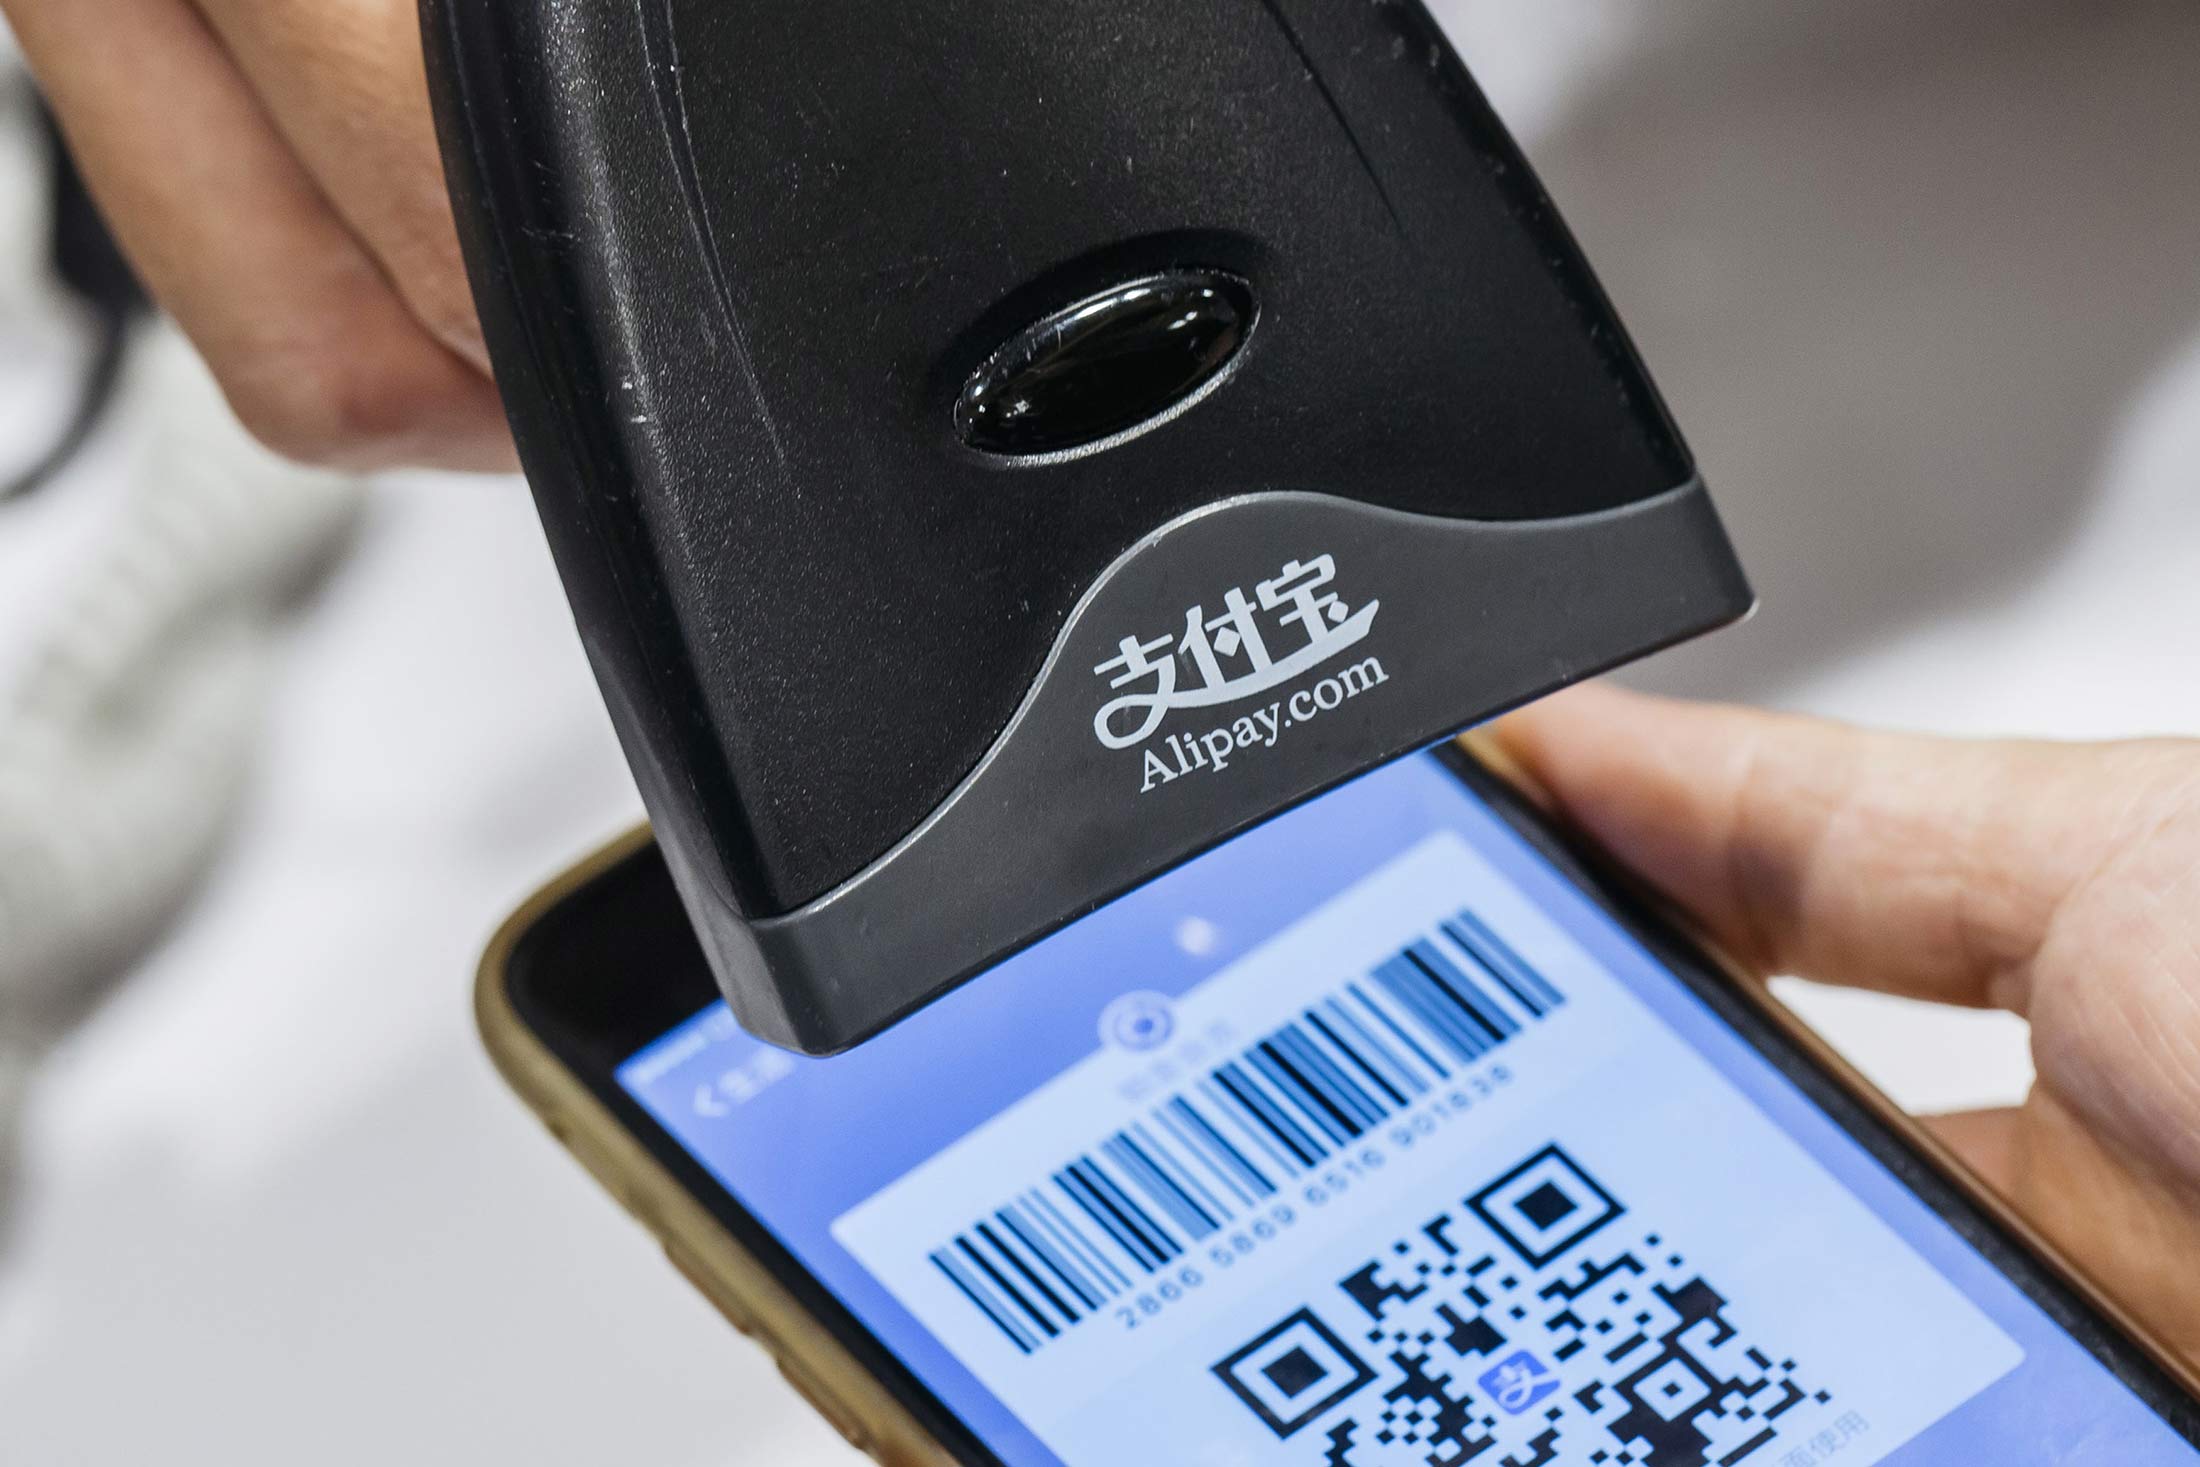 An employee scans a quick response (QR) code displayed on the Ant Financial Services Group's Alipay app, an affiliate of Alibaba Group Holding Ltd., inside a Sa Sa International Holdings Ltd. store in an arranged photograph in Hong Kong, China, on Tuesday, Nov. 1, 2016. The urgency to prepare regulatory environments for fintech is growing as banks begin offering digital services such as biometric authentication and as mobile-payment systems such as Apple Pay and AliPay are introduced around the region.
